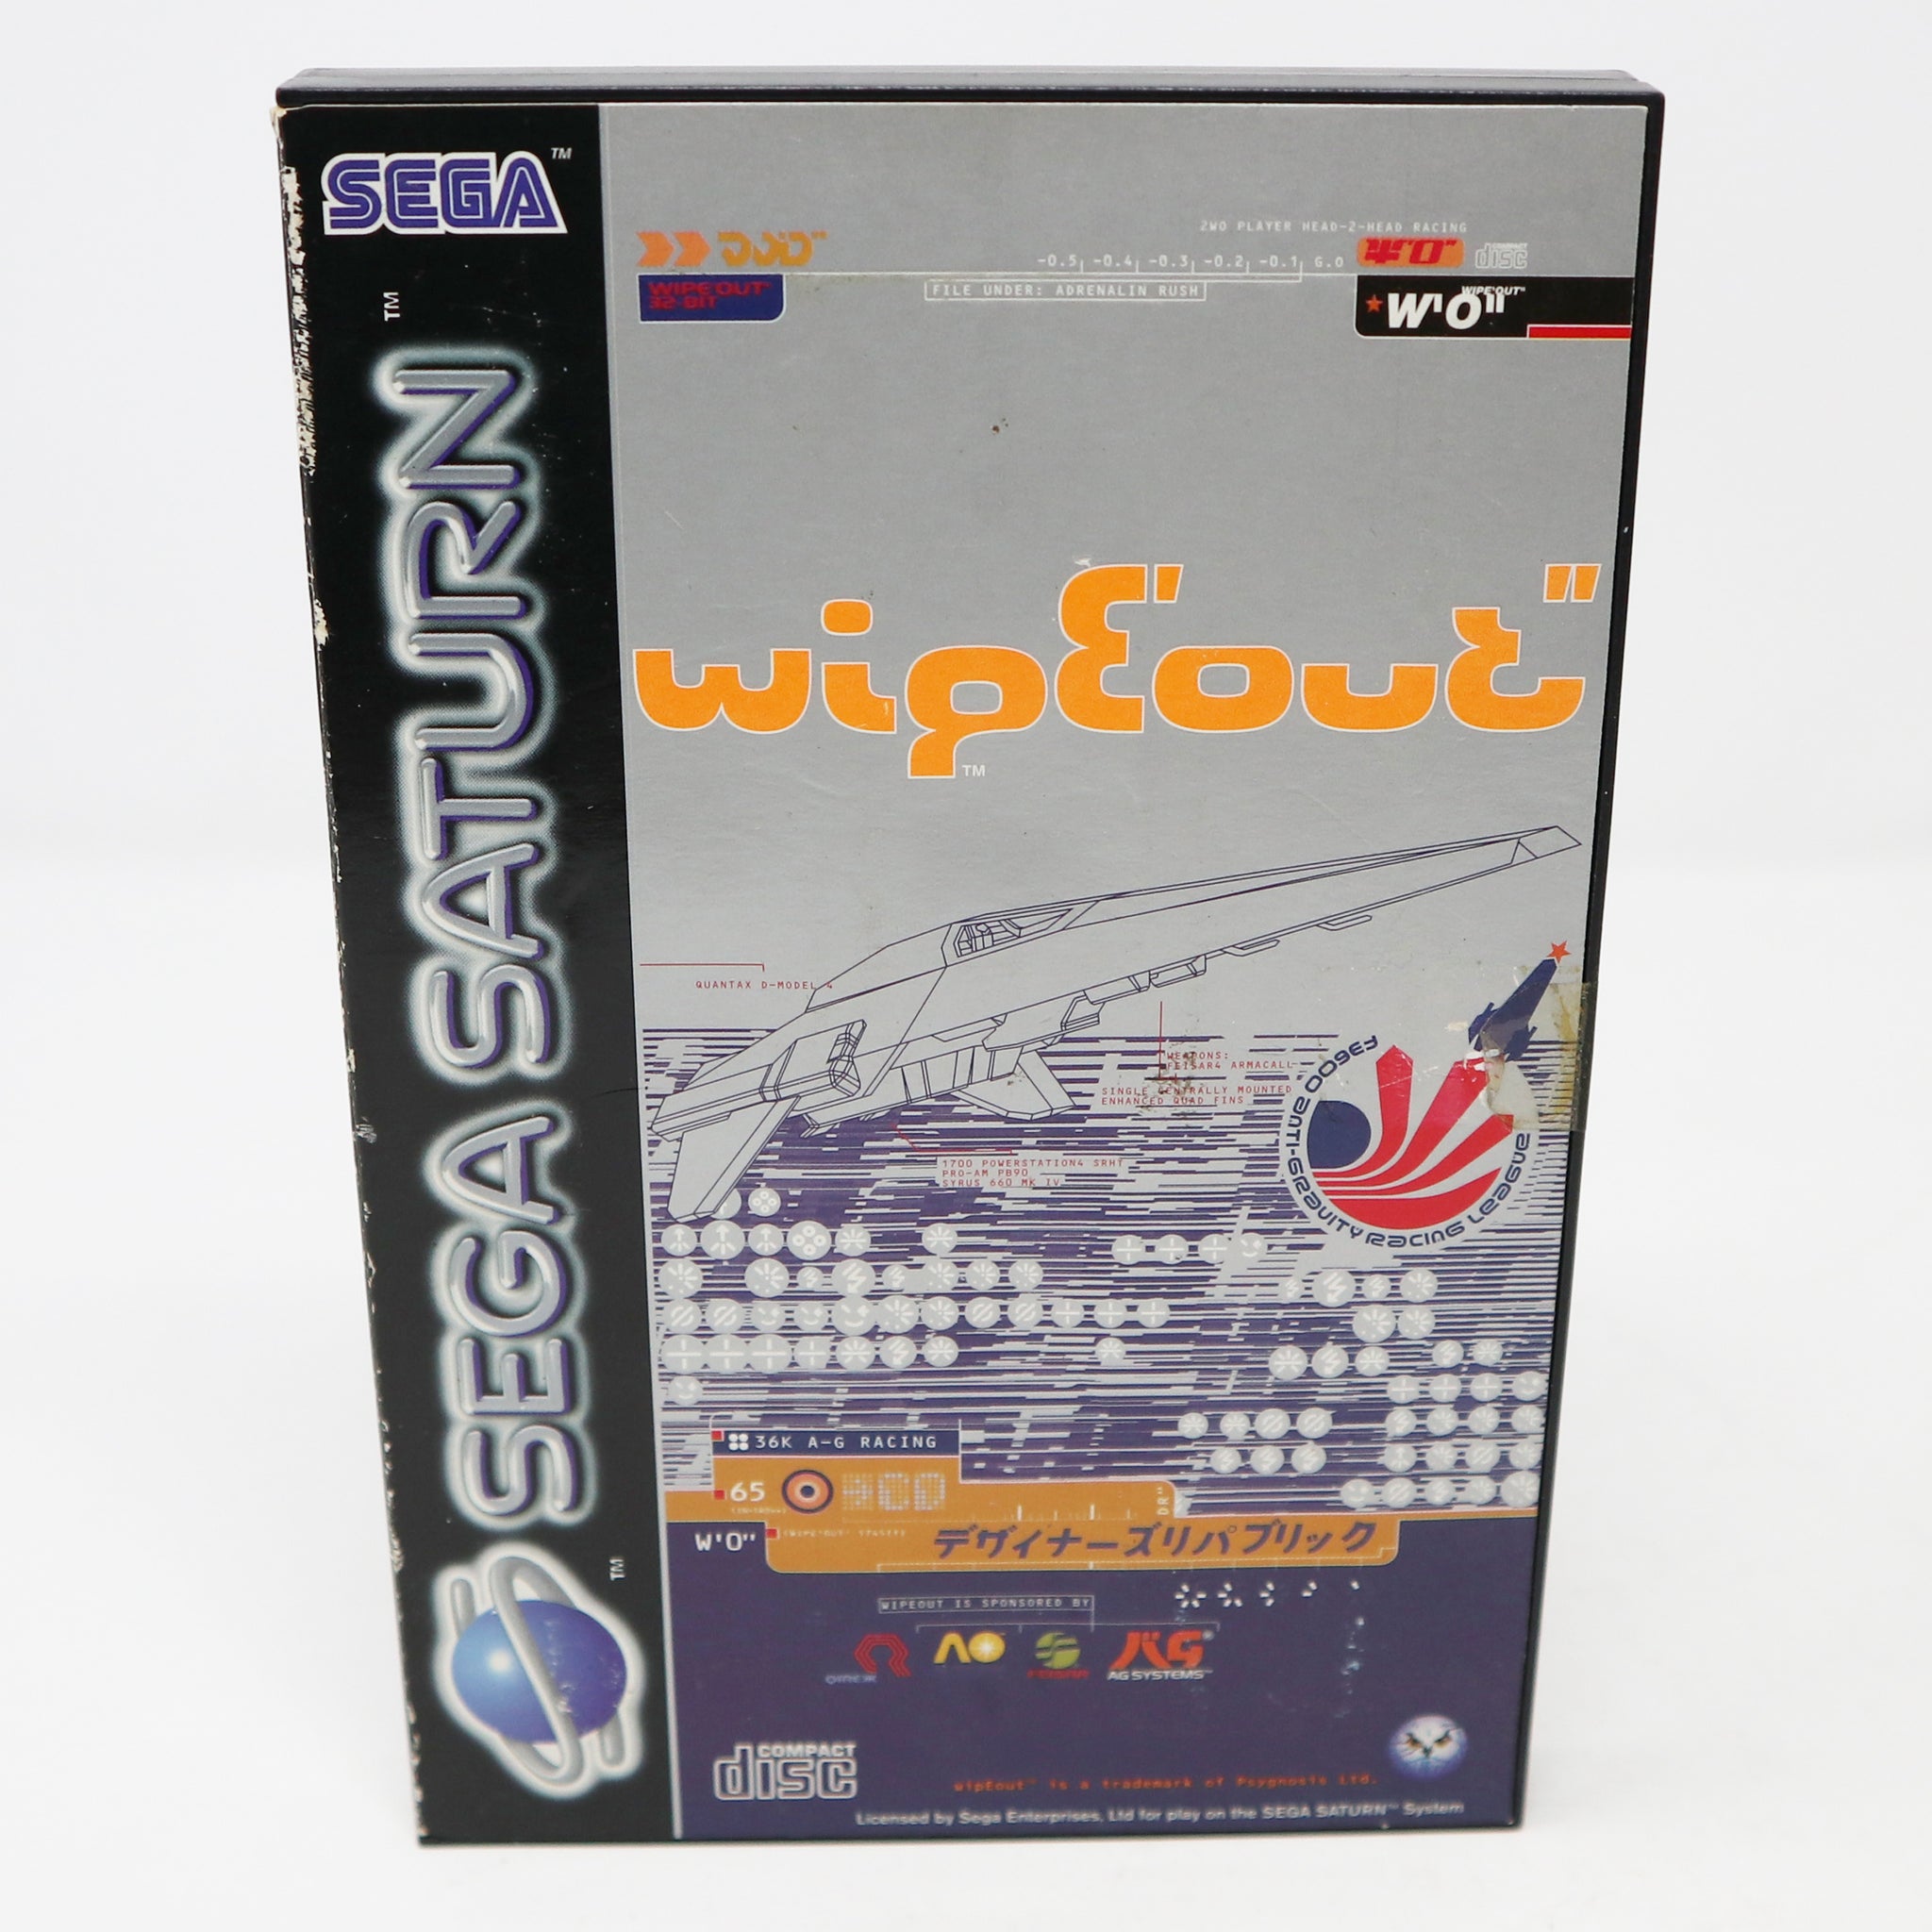 Vintage 1995 90s Sega Saturn Wipeout Video Game PAL French Secam 1 Player